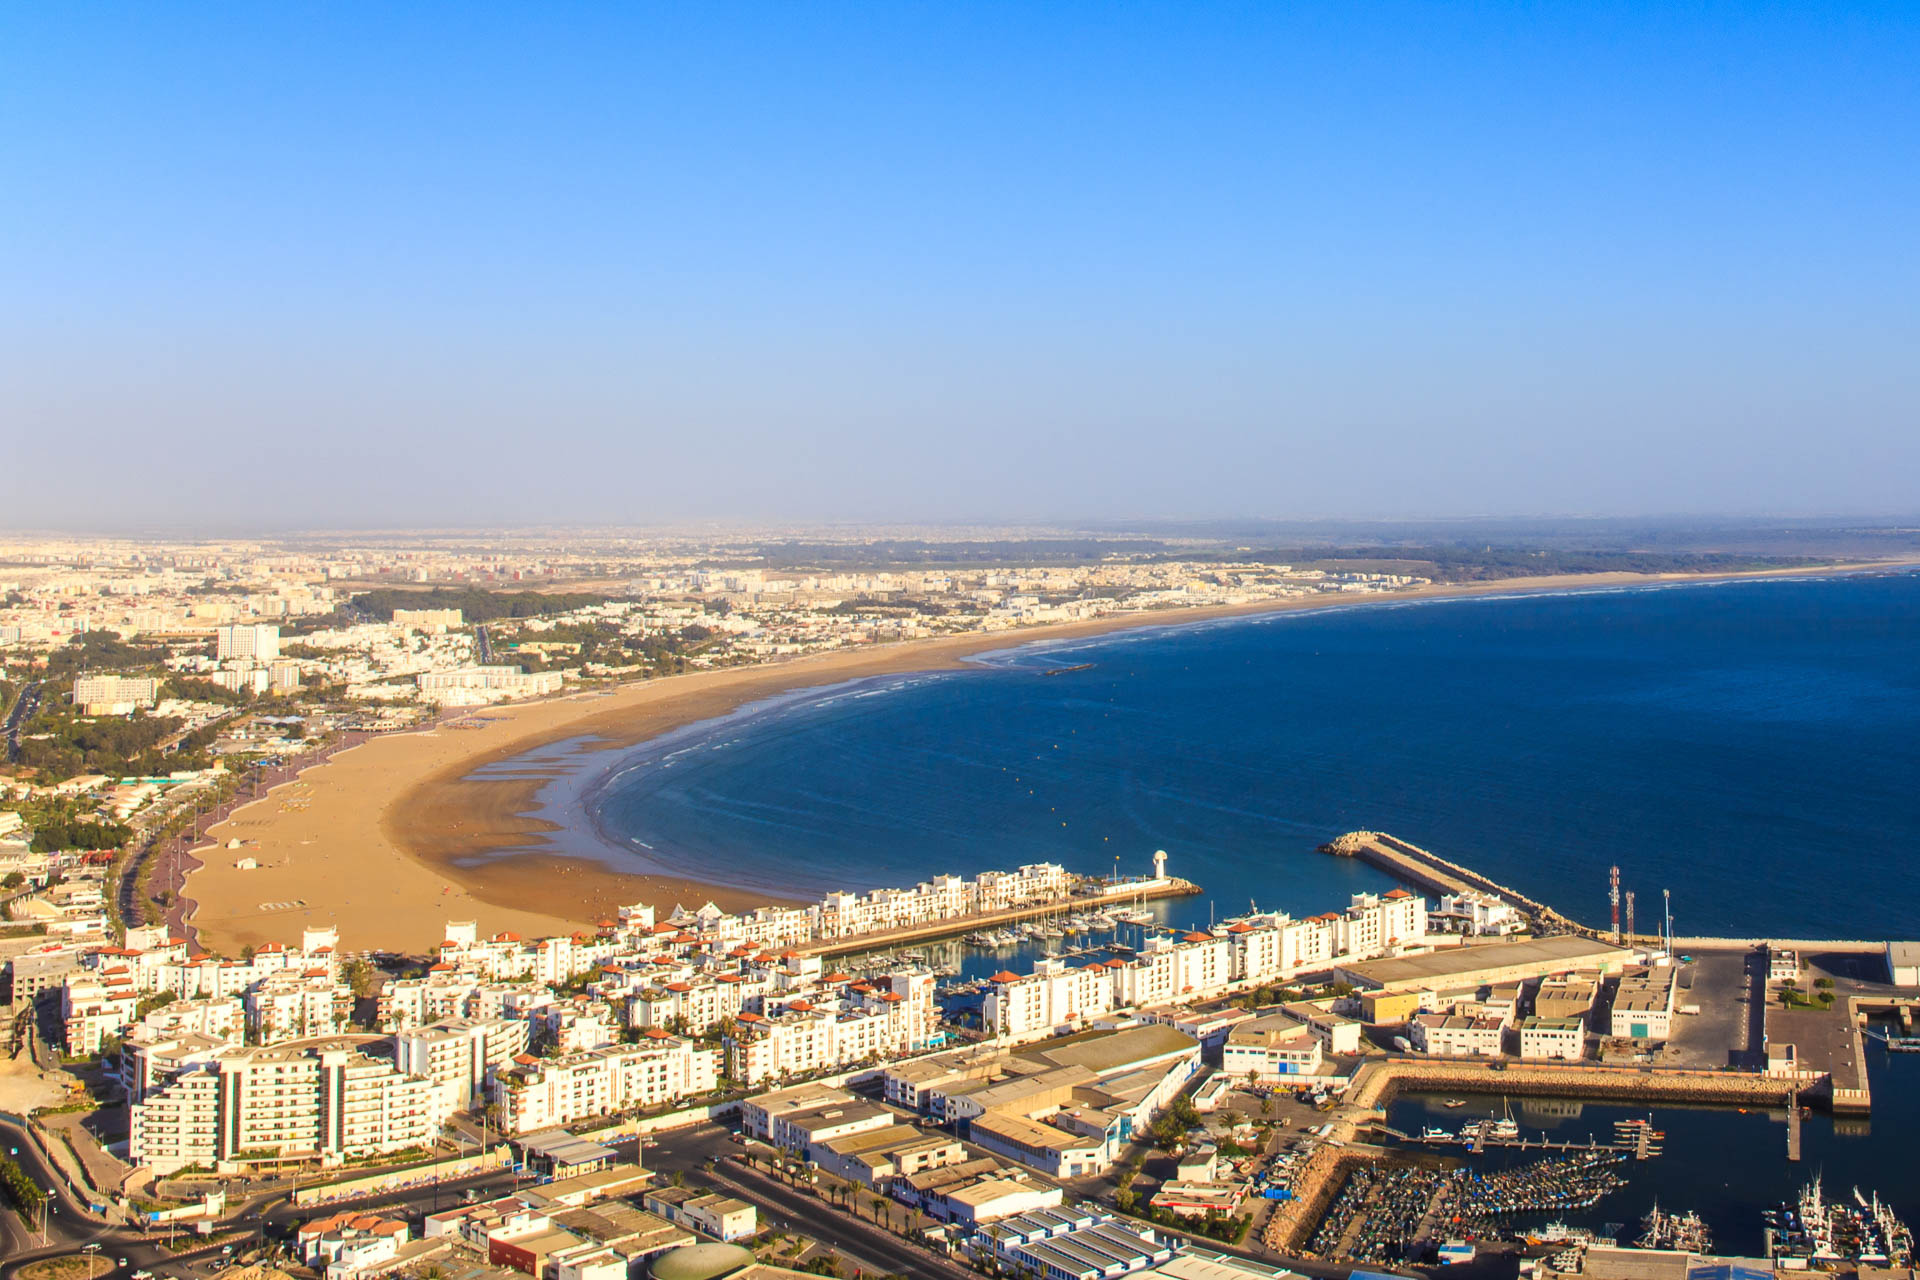 Panorama of Agadir, Morocco. A view from the mountain.